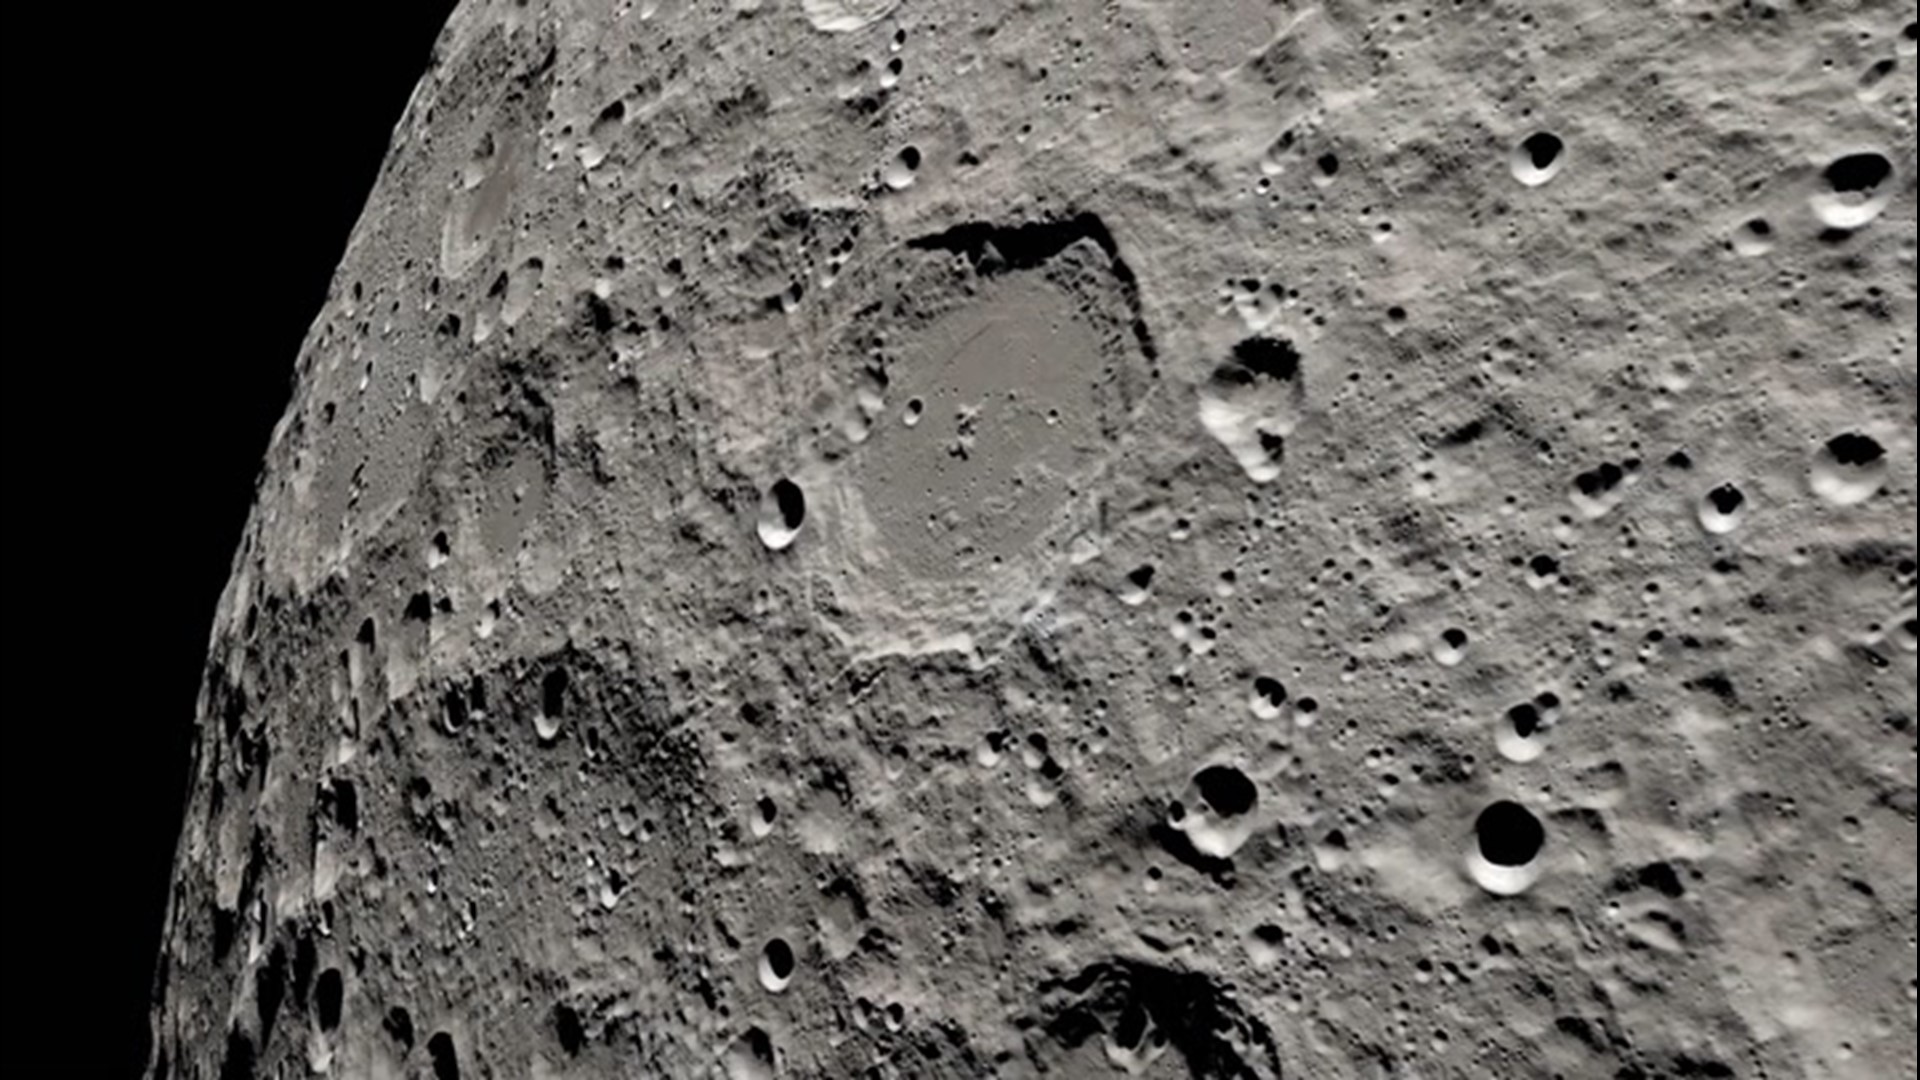 NASA recently released a video detailing what the Apollo 13 astronauts saw during their journey to the far side of the moon, the region never visible back on the Earth.